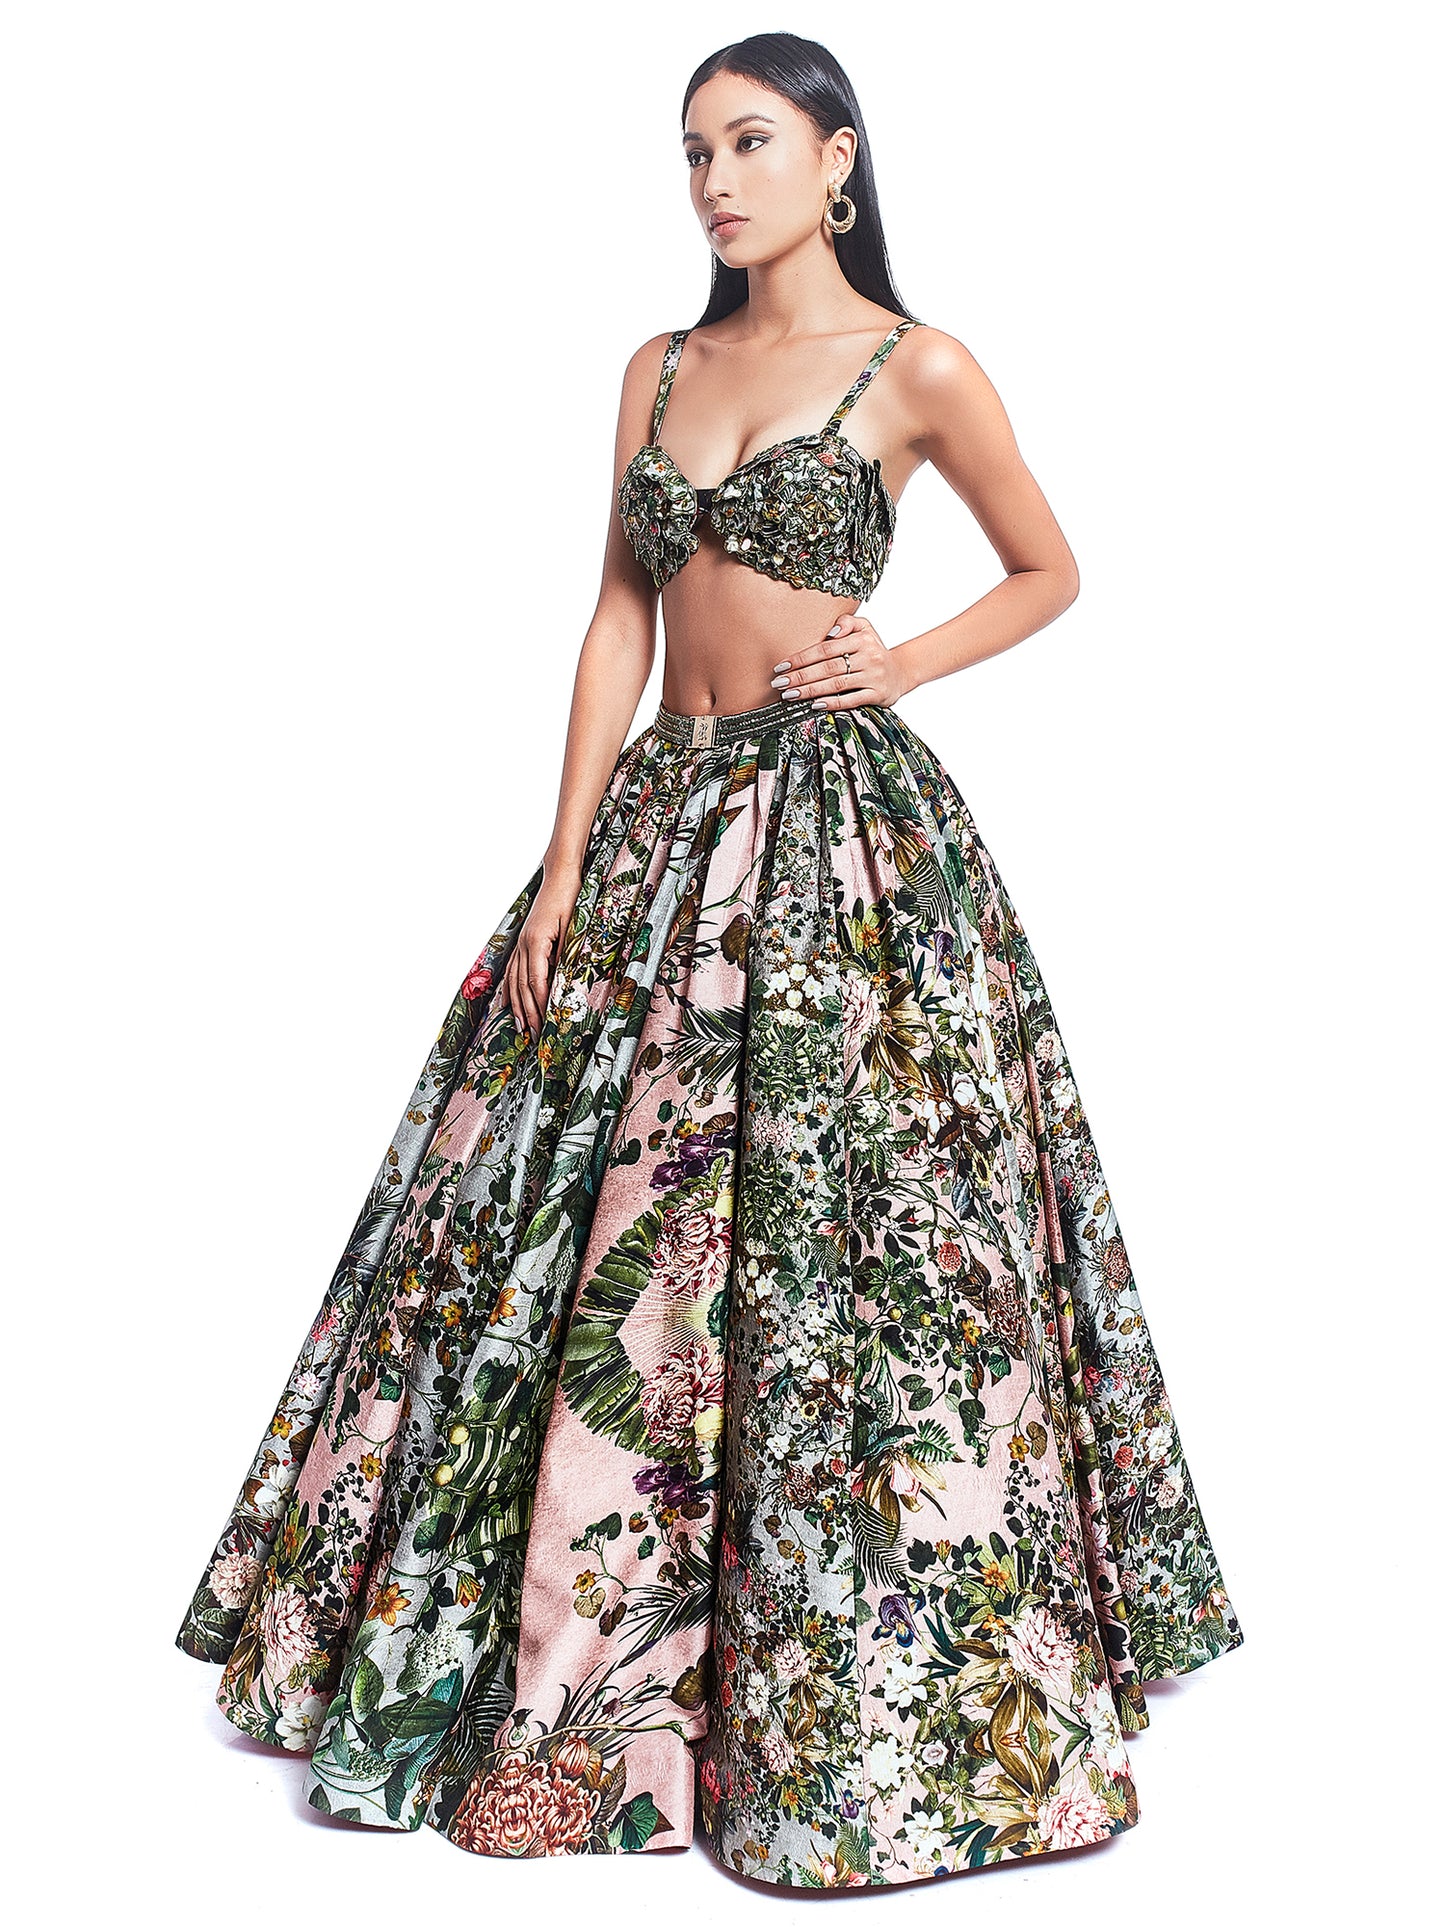 Printed Patchwork Bustier with Dual Coloured Godet Skirt